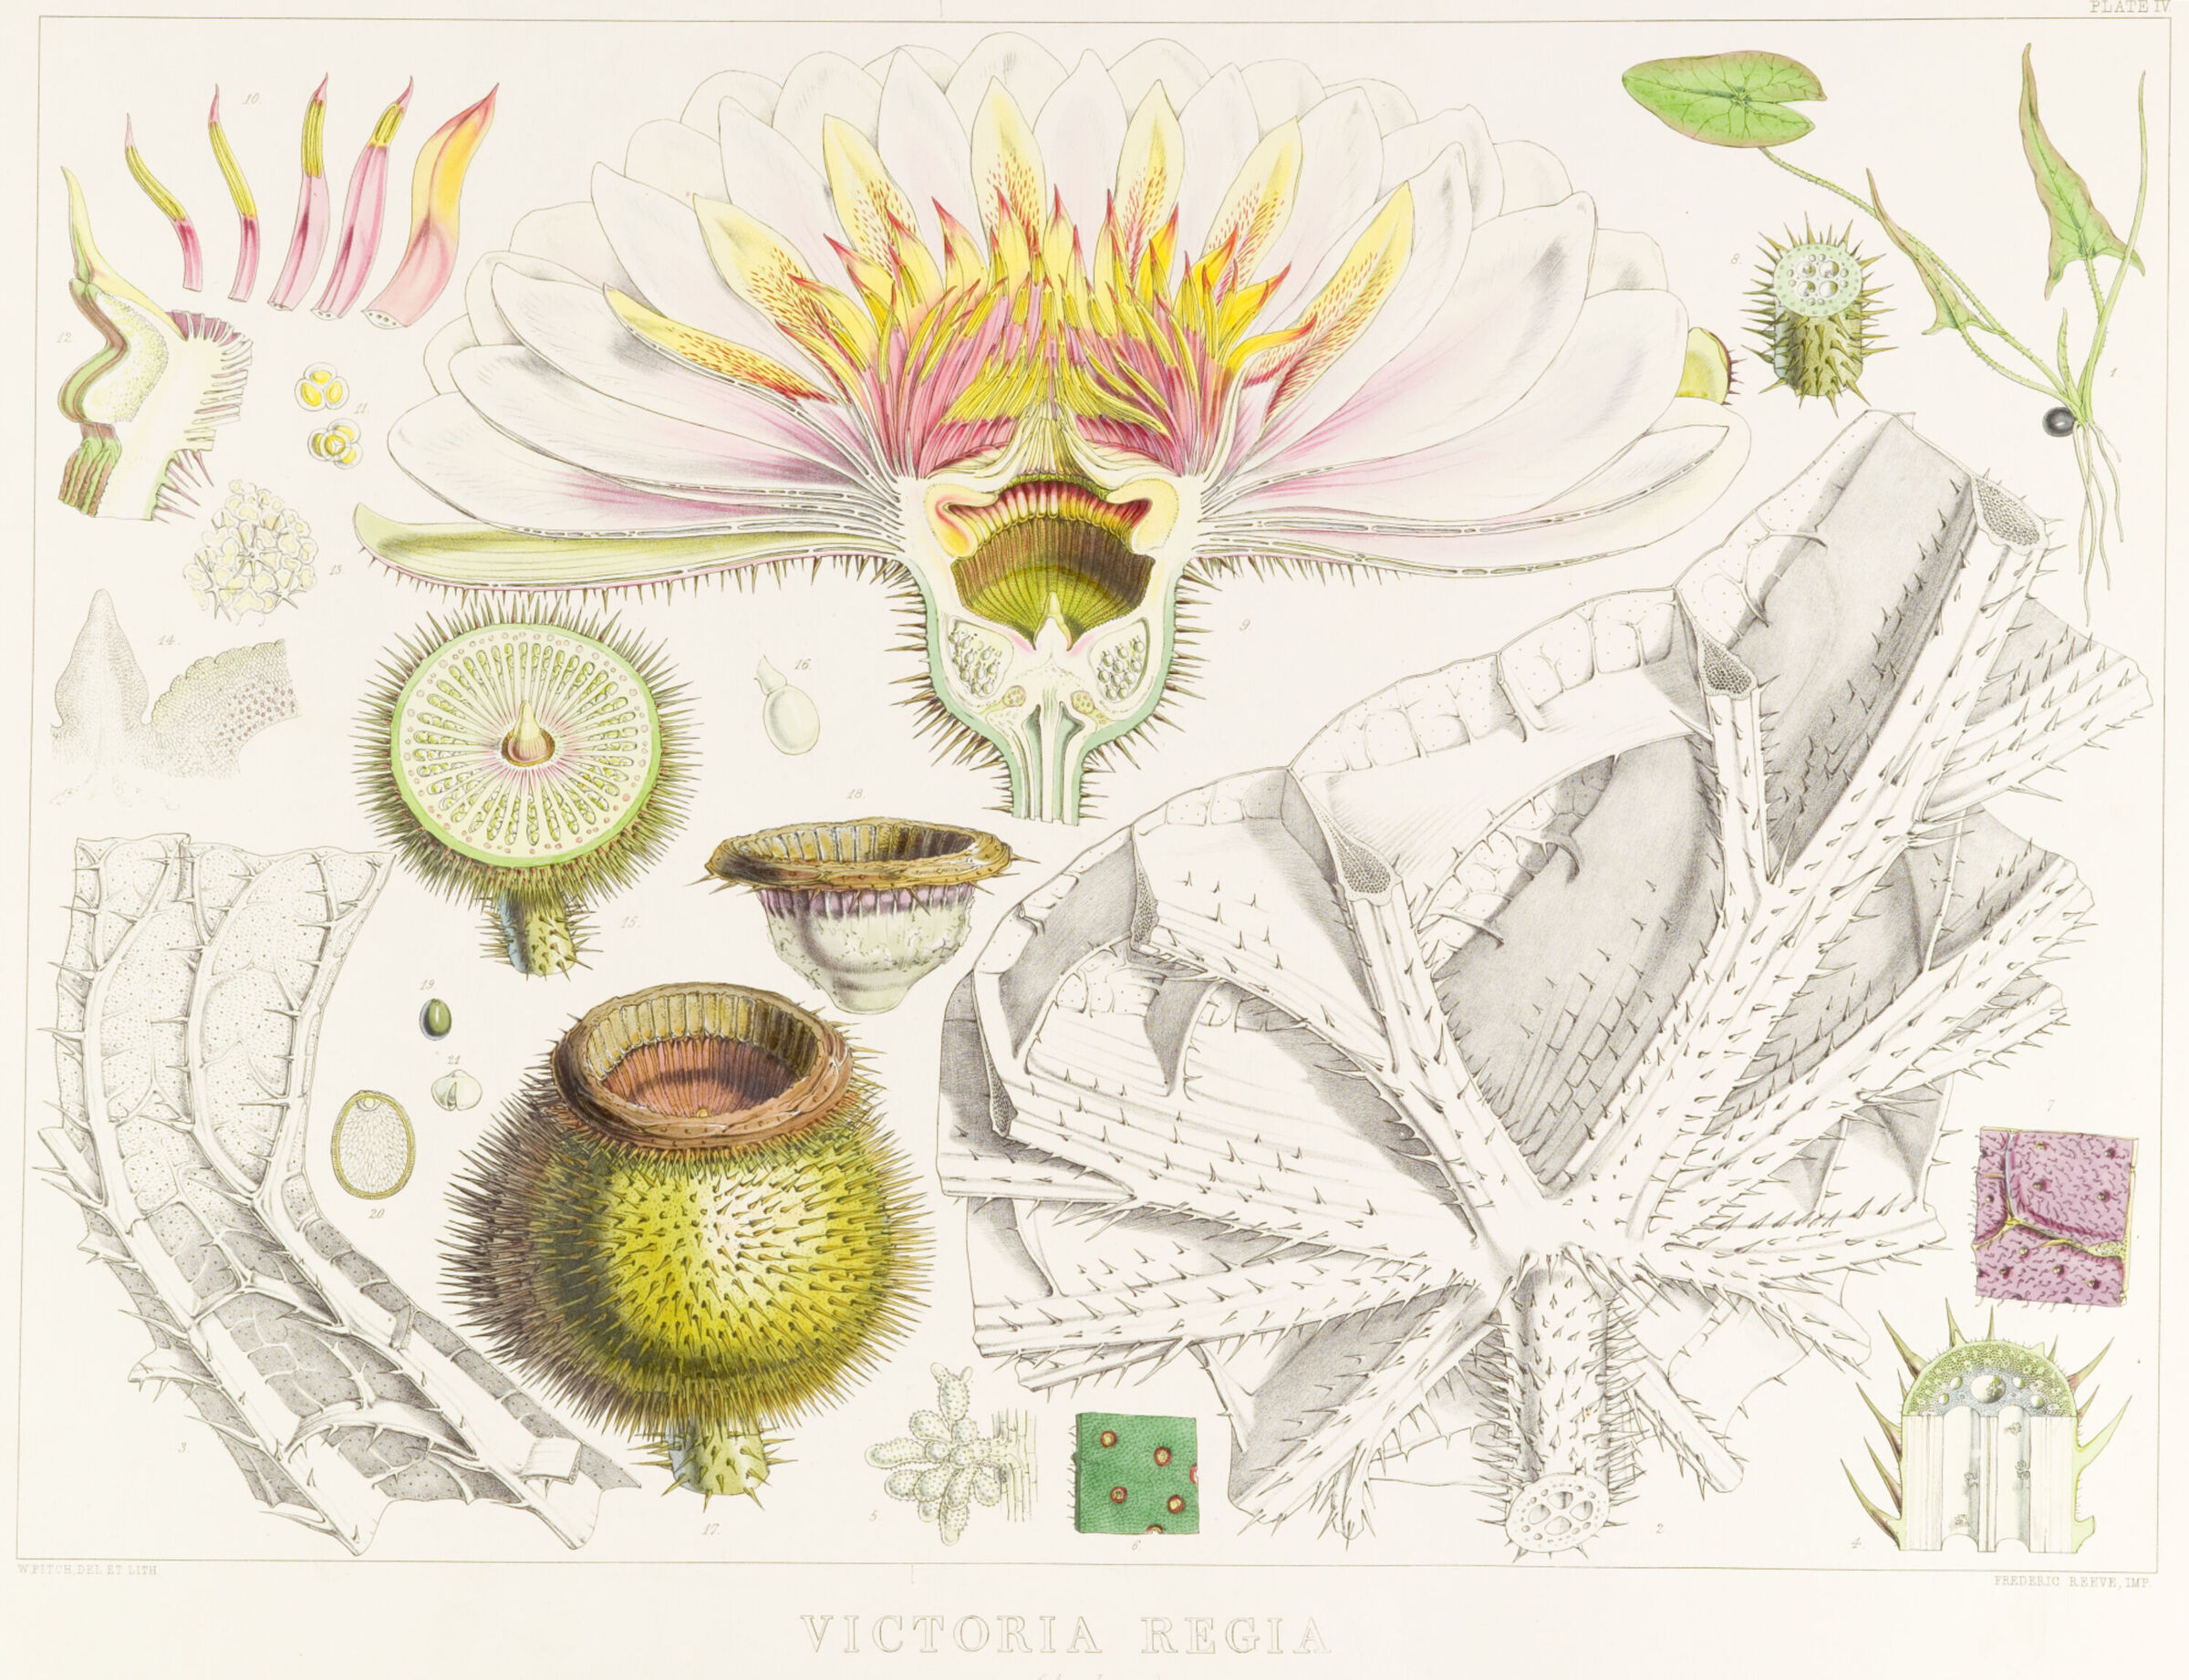 Diagram of dissected parts of a giant Victoria waterlily including flower, bud and leaf